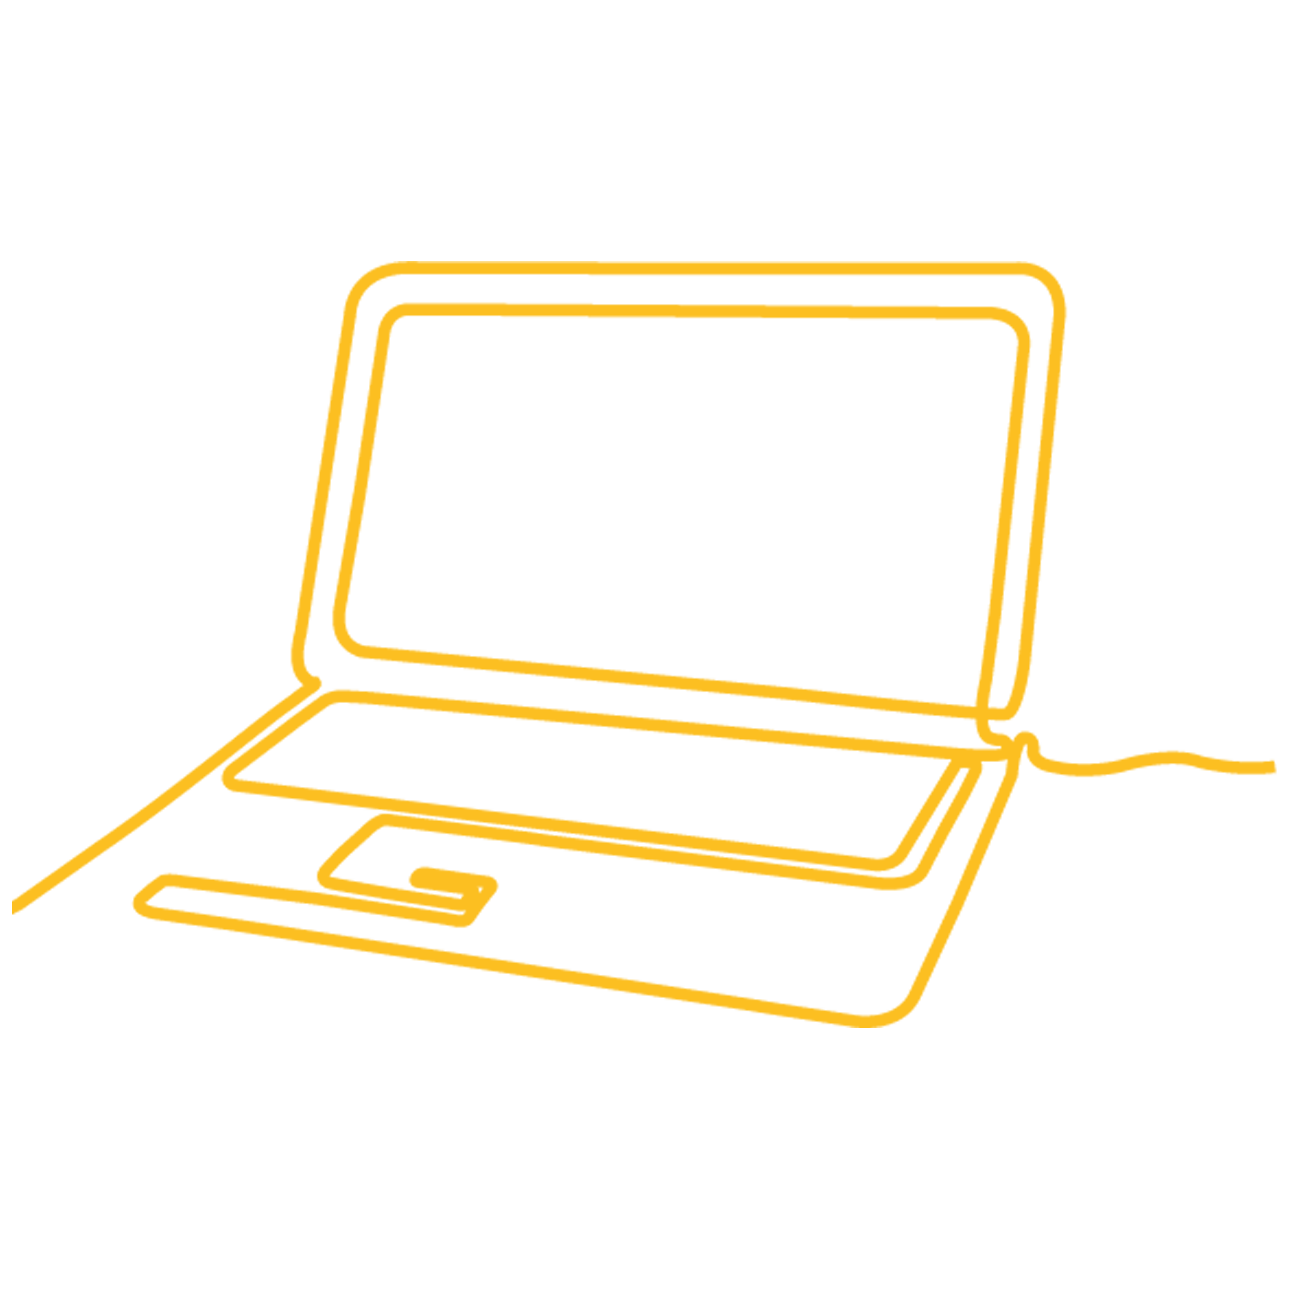 Laptop icon for technology & saas industry recruiting